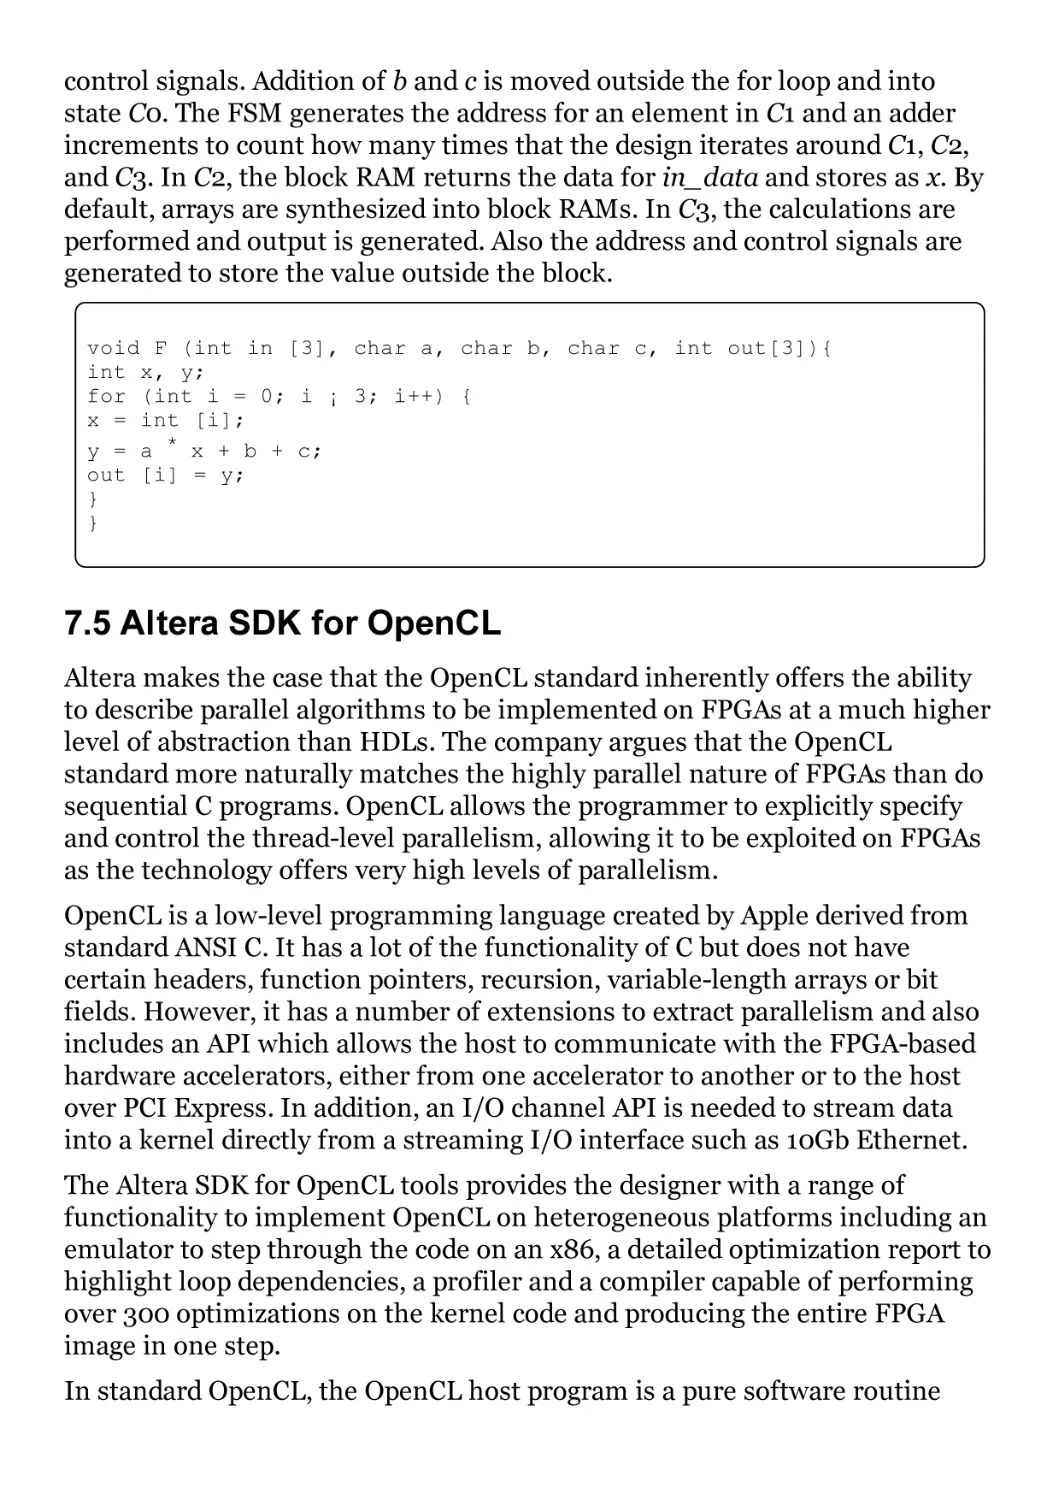 7.5 Altera SDK for OpenCL